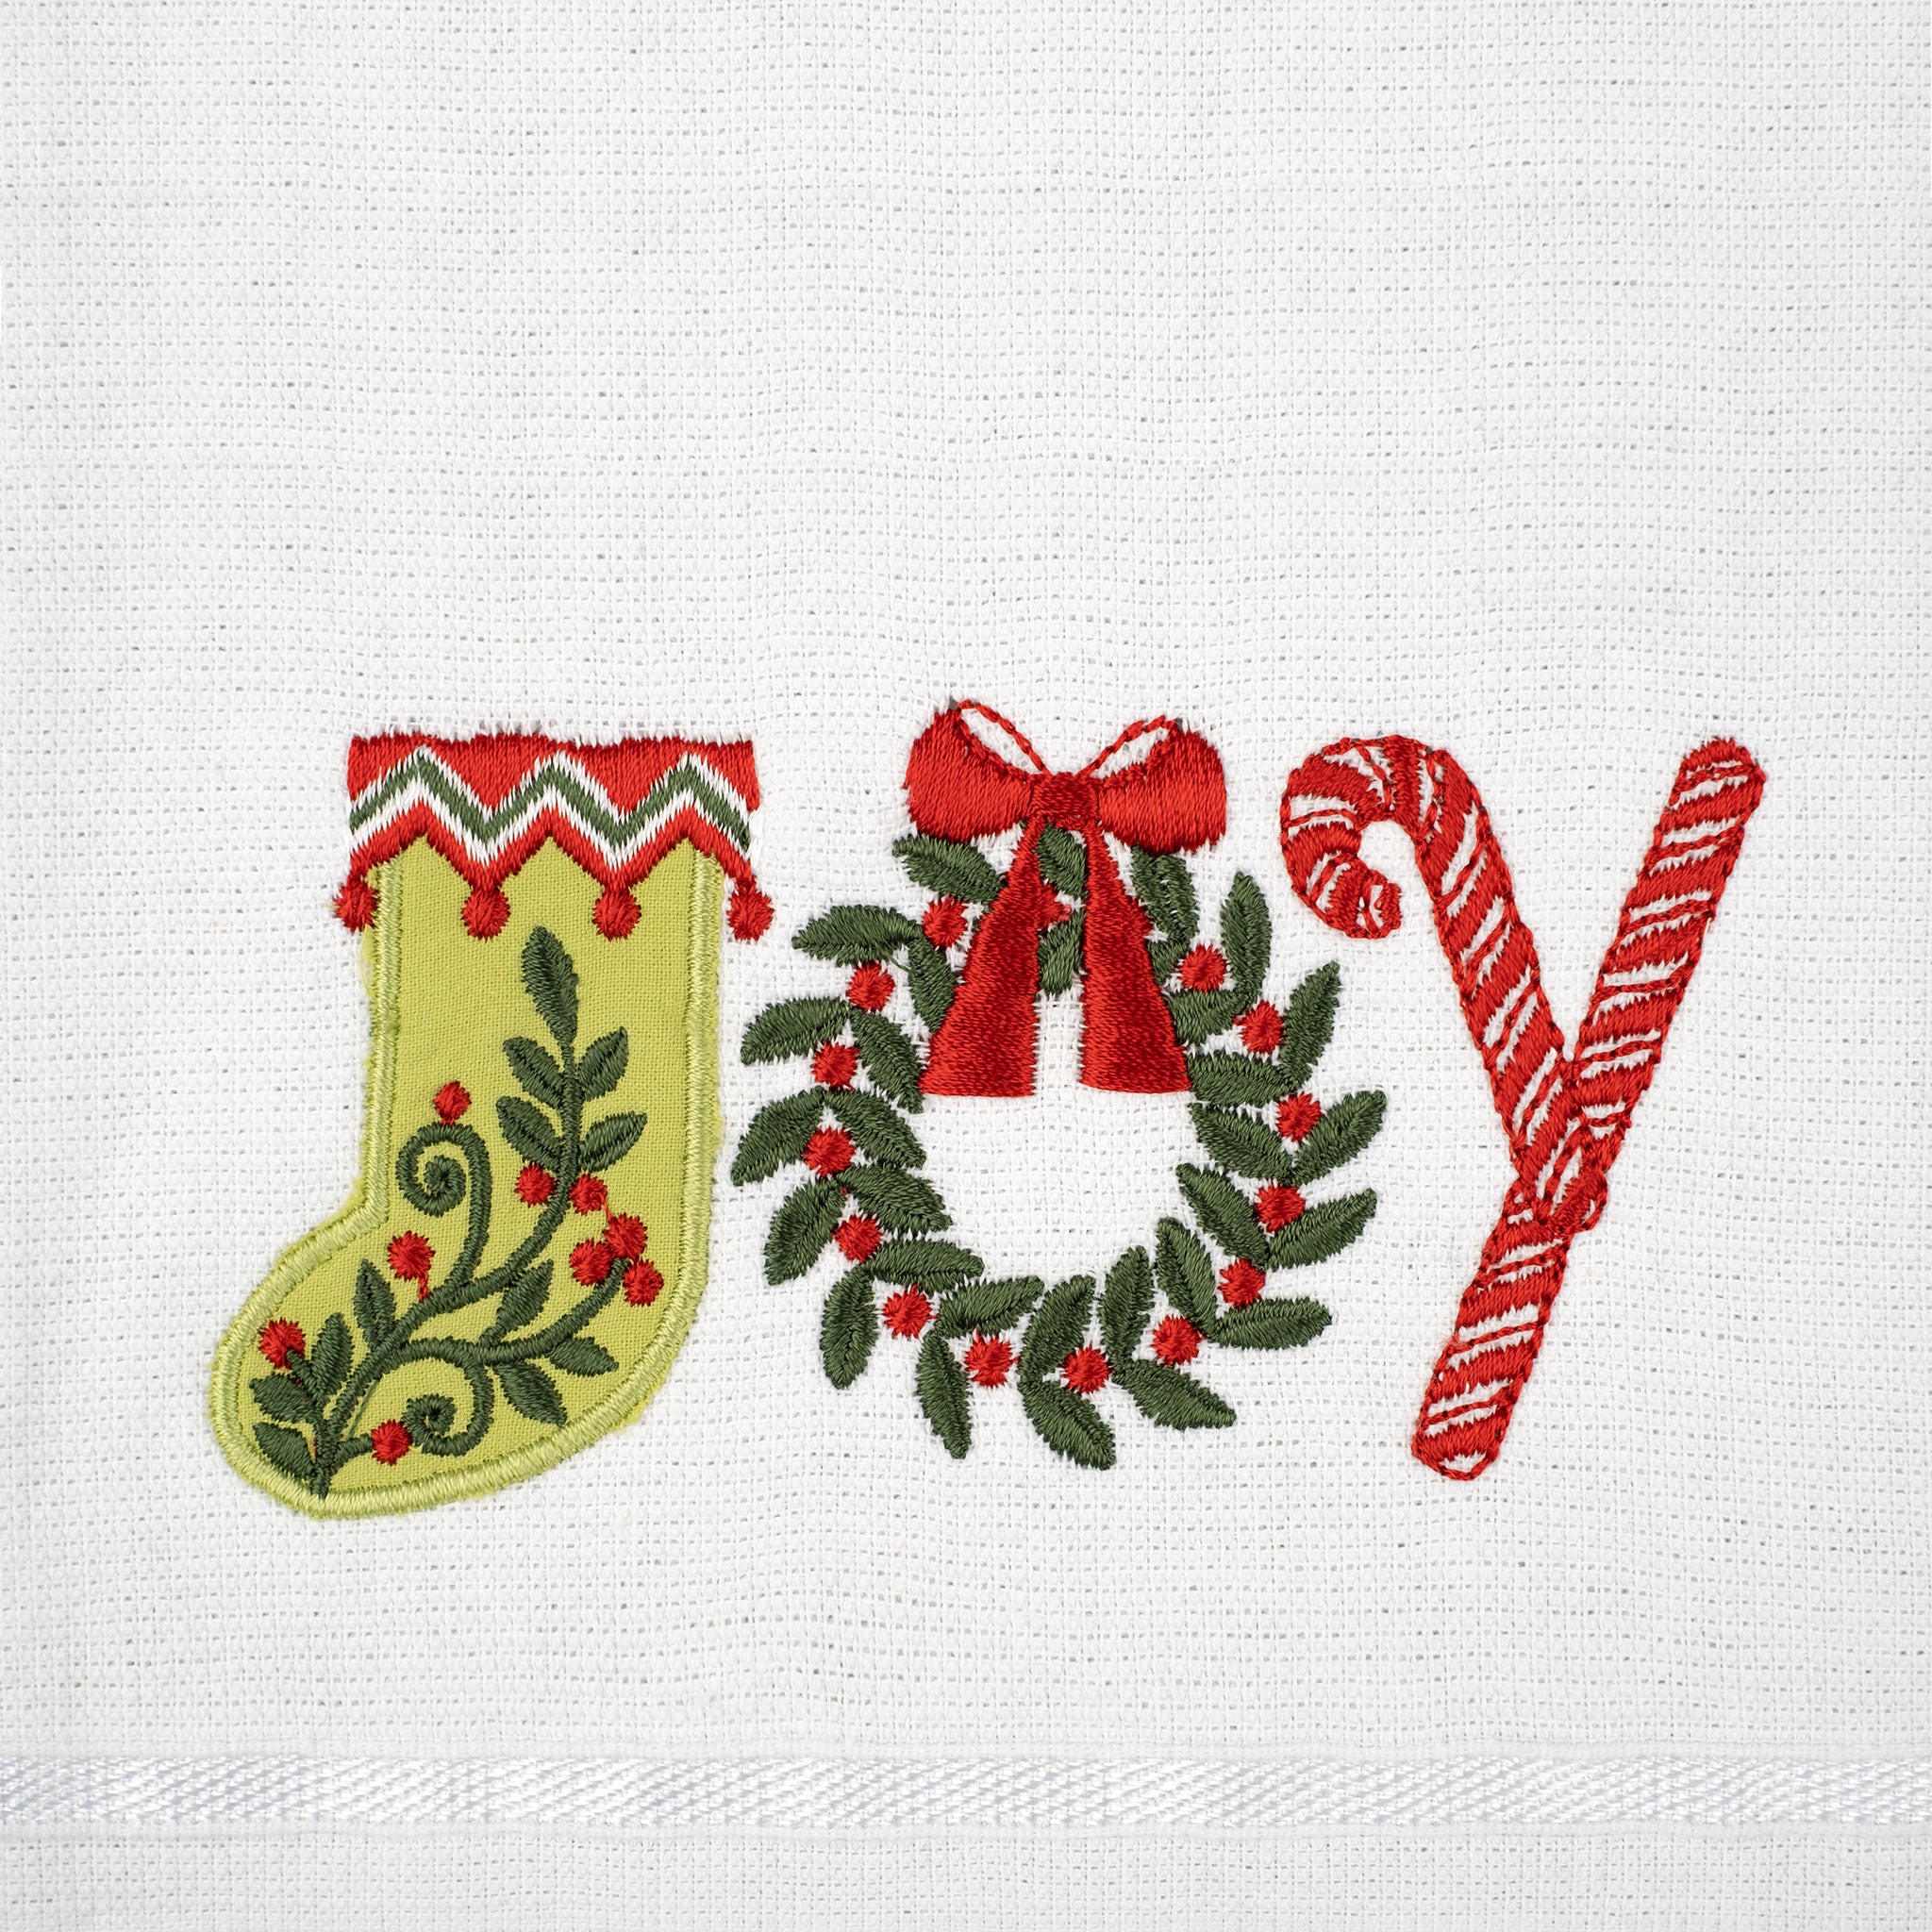  American Soft Linen - Christmas Towels Set 2 Packed Embroidered Turkish Cotton Hand Towels - Joy Cat - 3